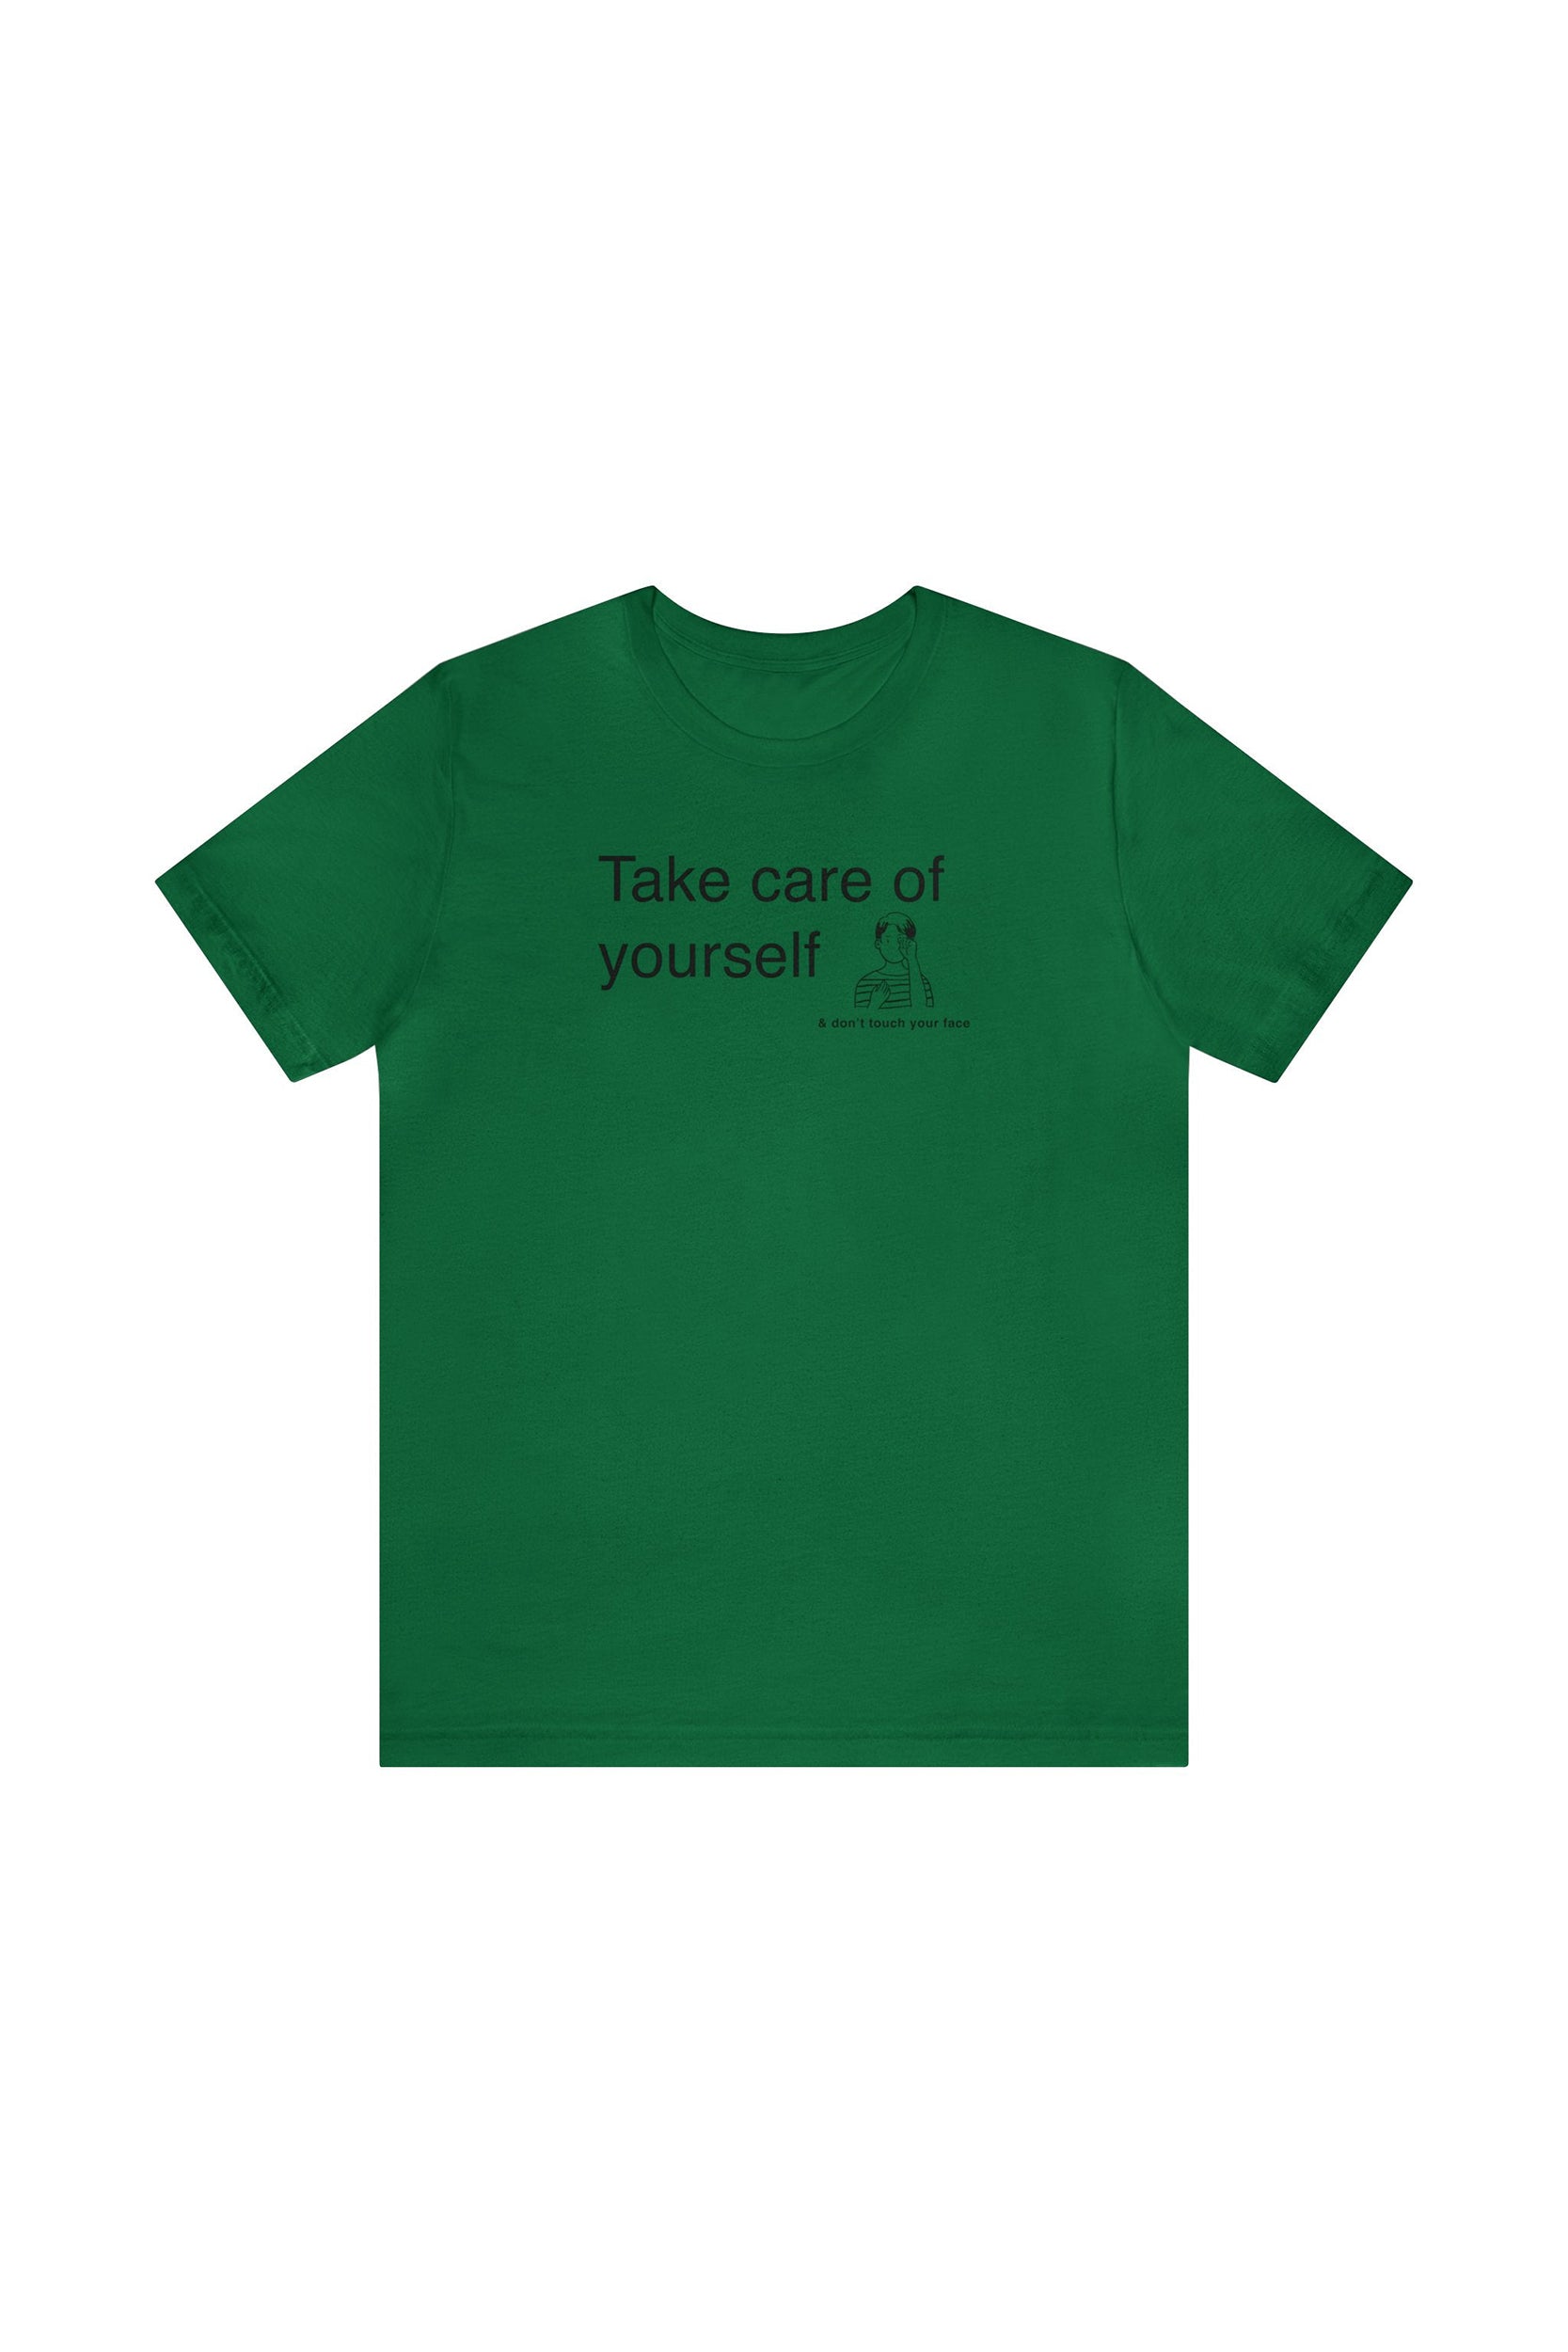 "Take Care of Yourself (and don't touch your face)" T-Shirt